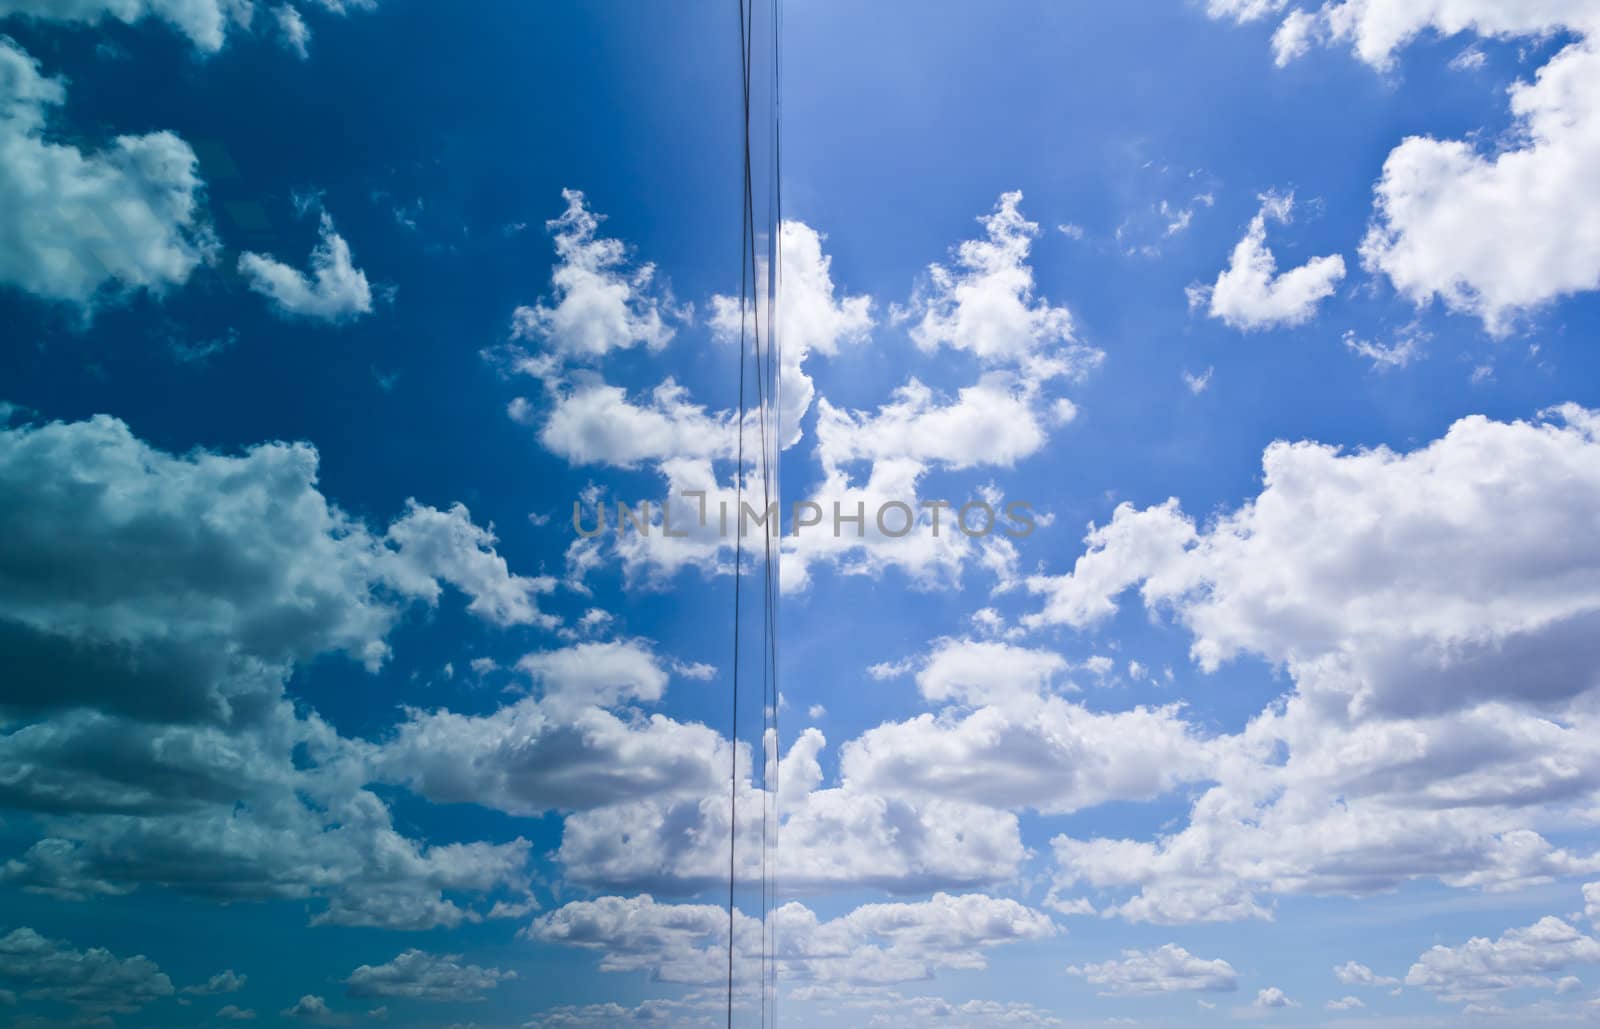 cloud and sky reflection in mirror of office building